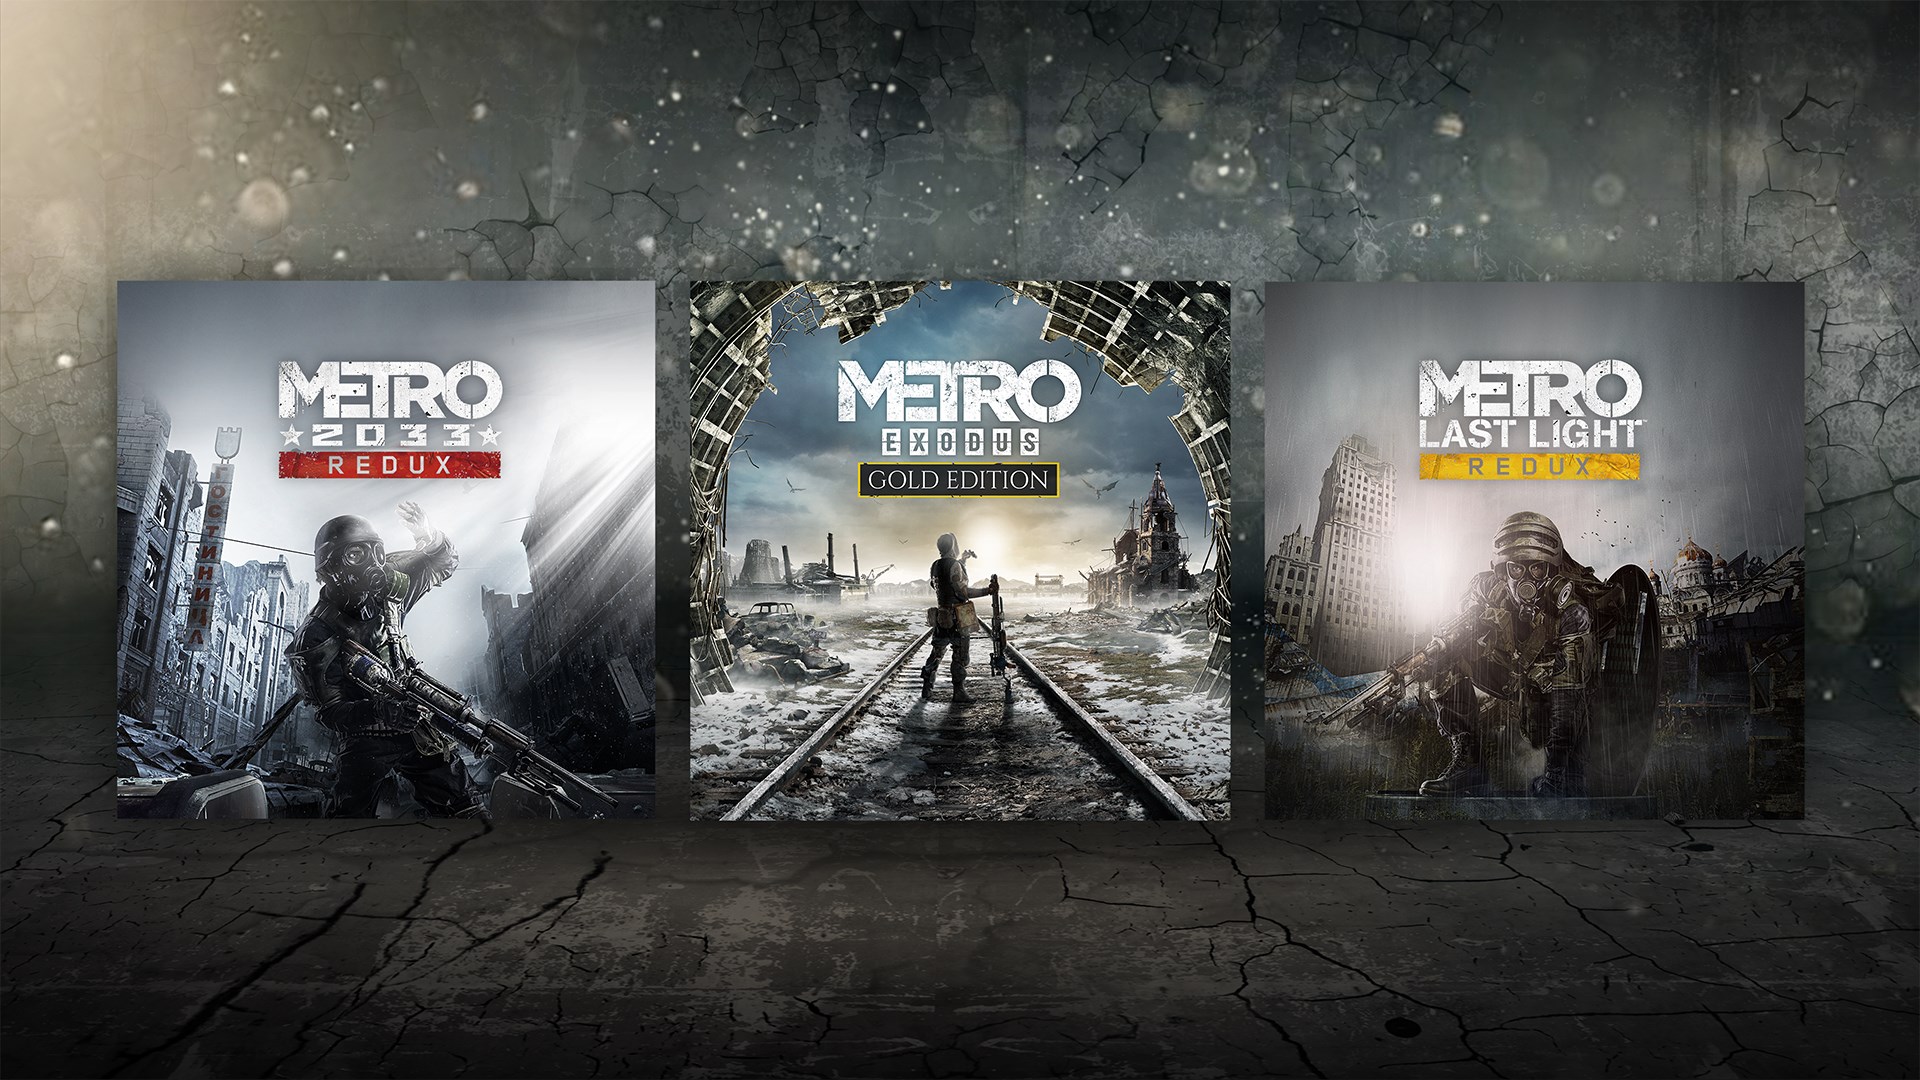 Metro Last Light Redux  Download and Buy Today - Epic Games Store